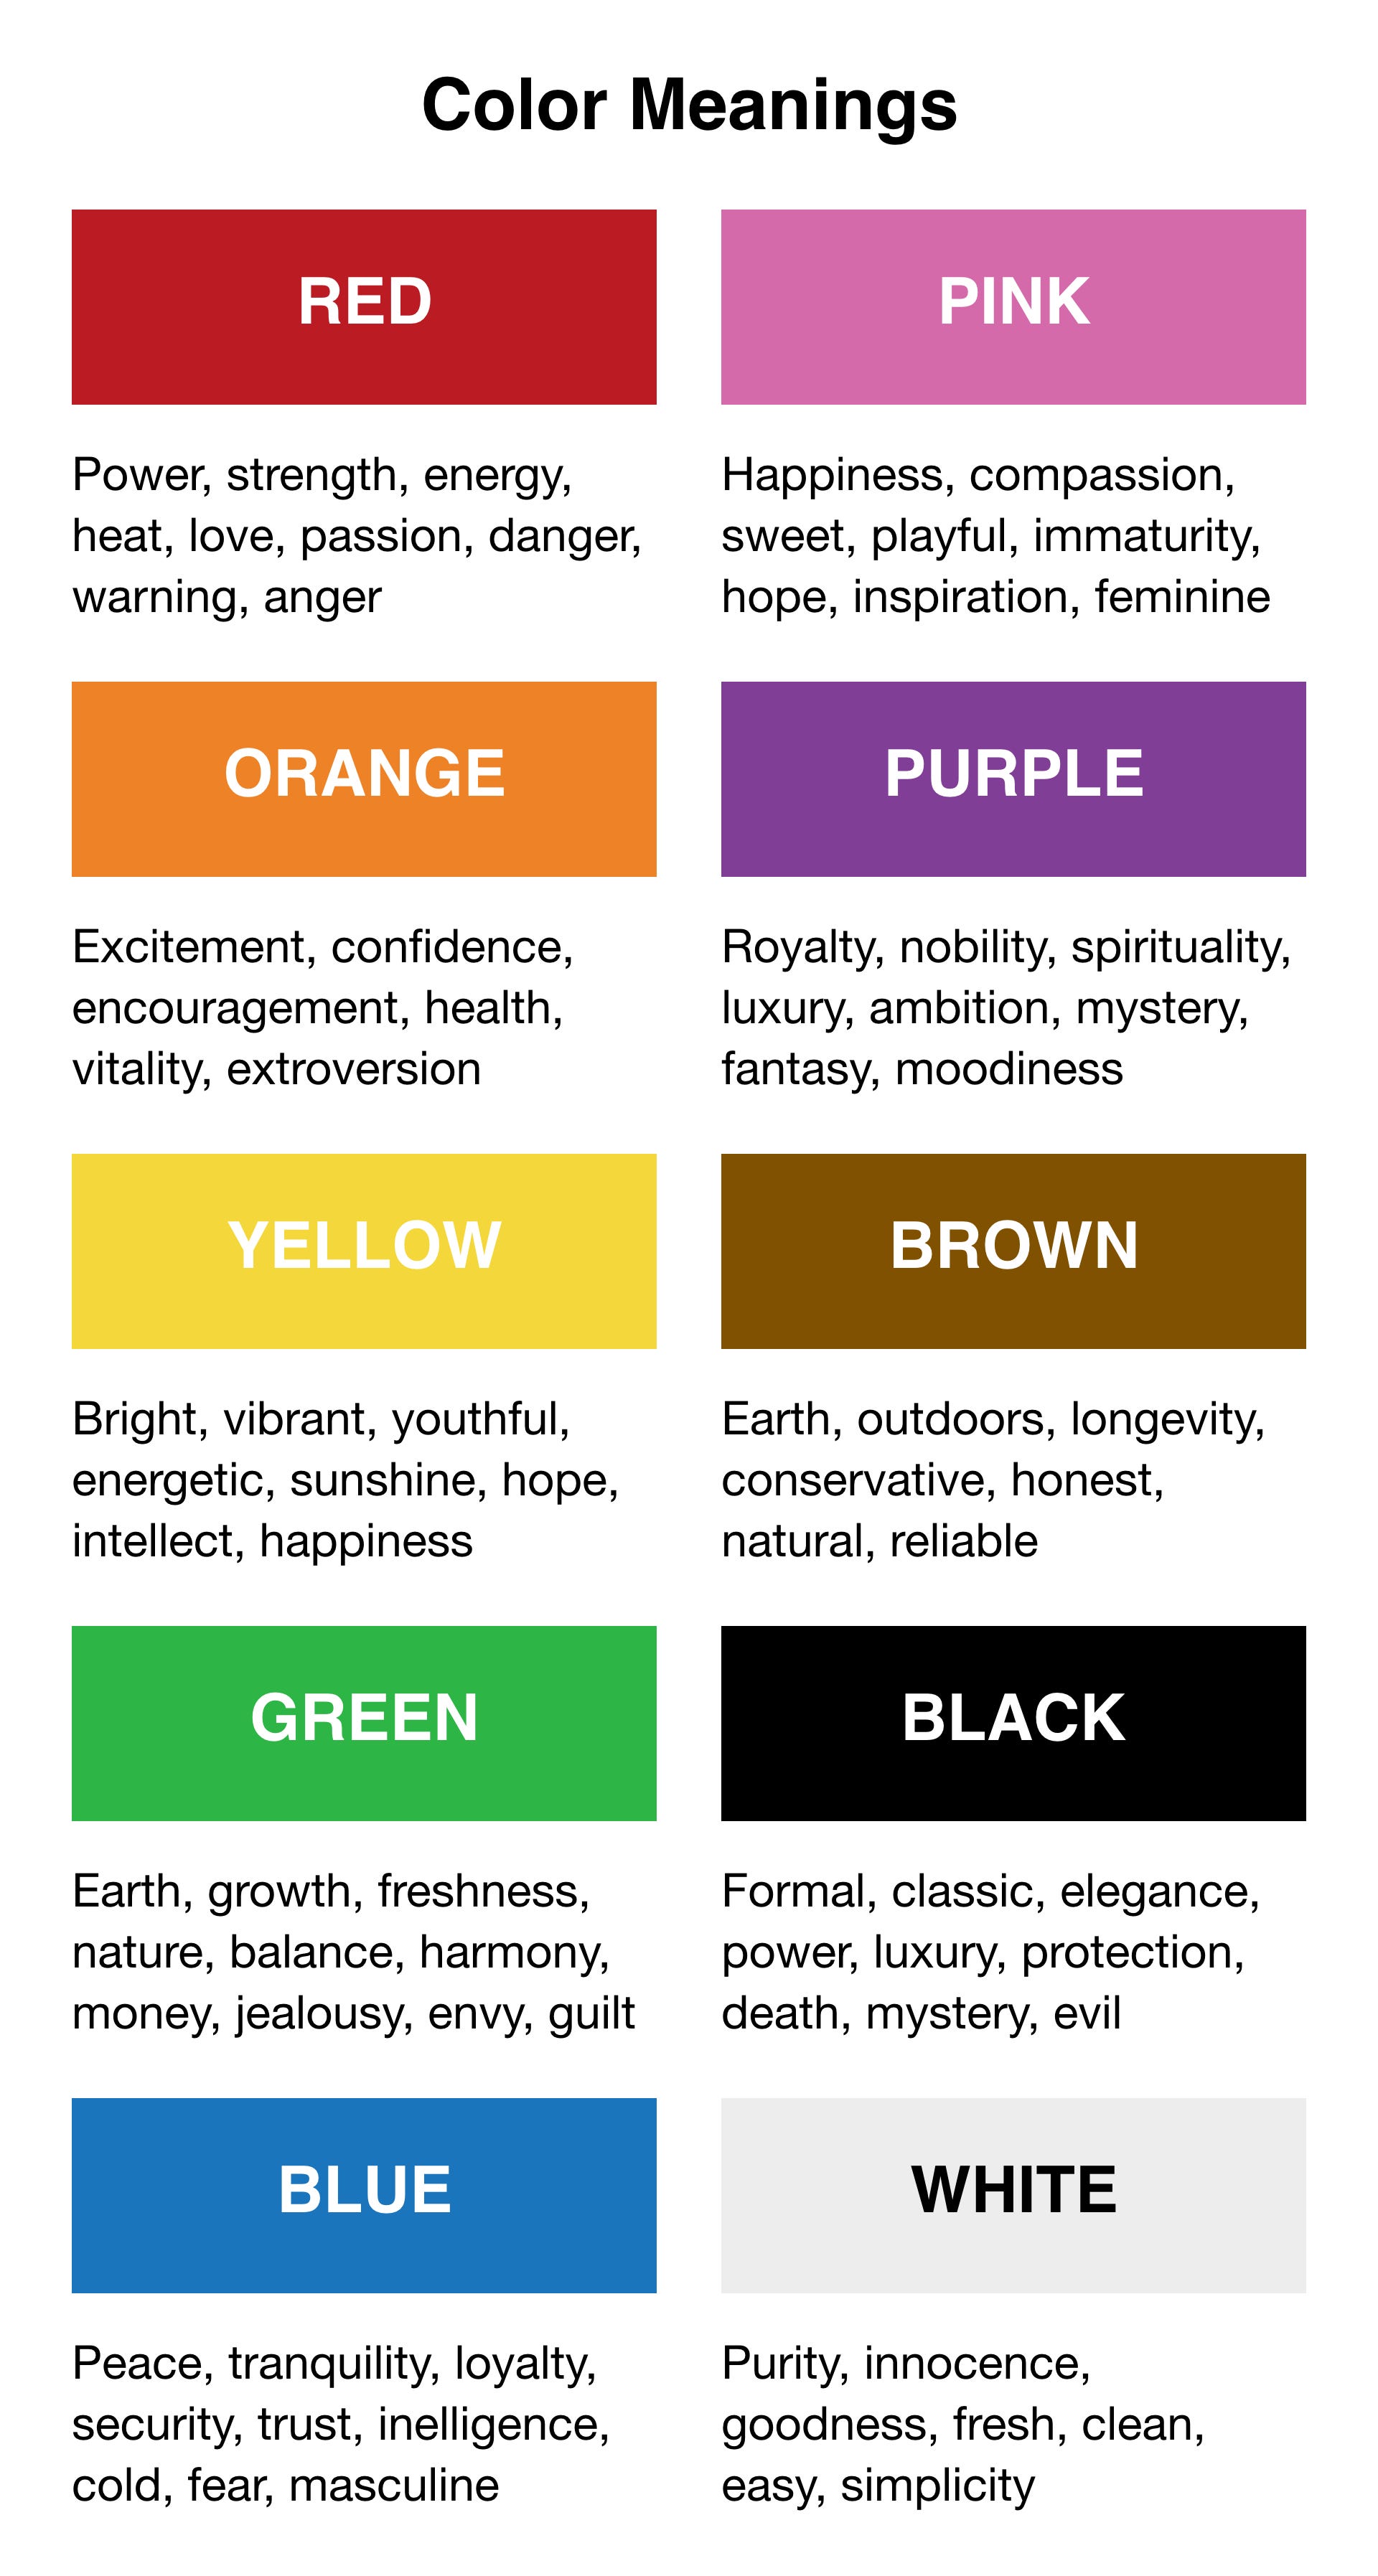 10 color meanings to help you choose the best colors for your next ...